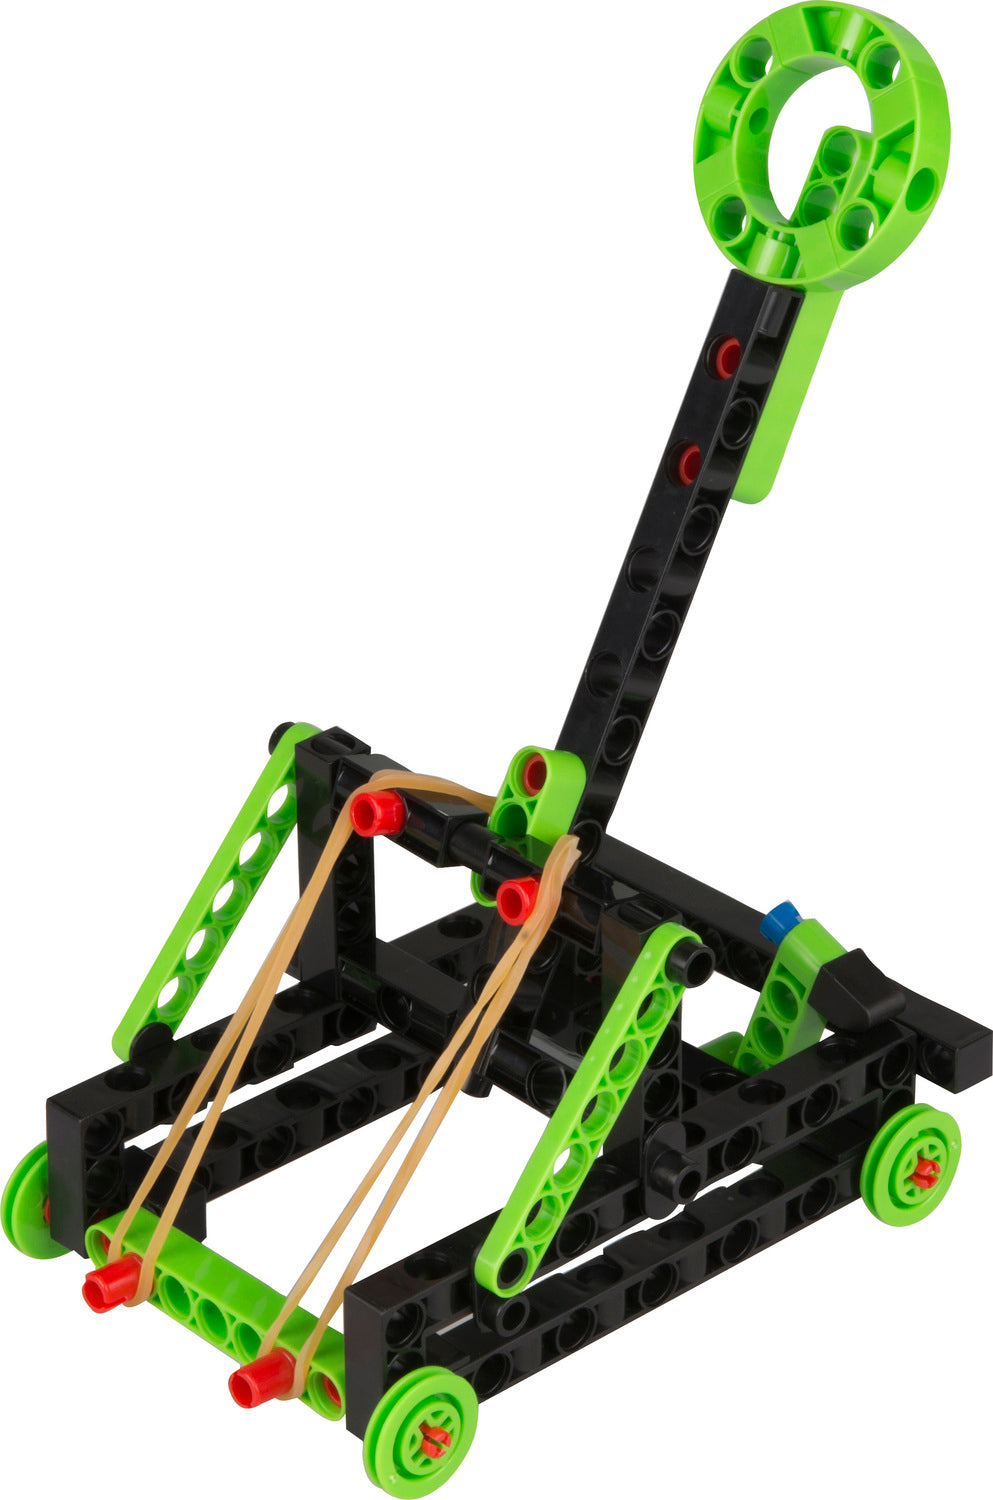 Catapults & Crossbows